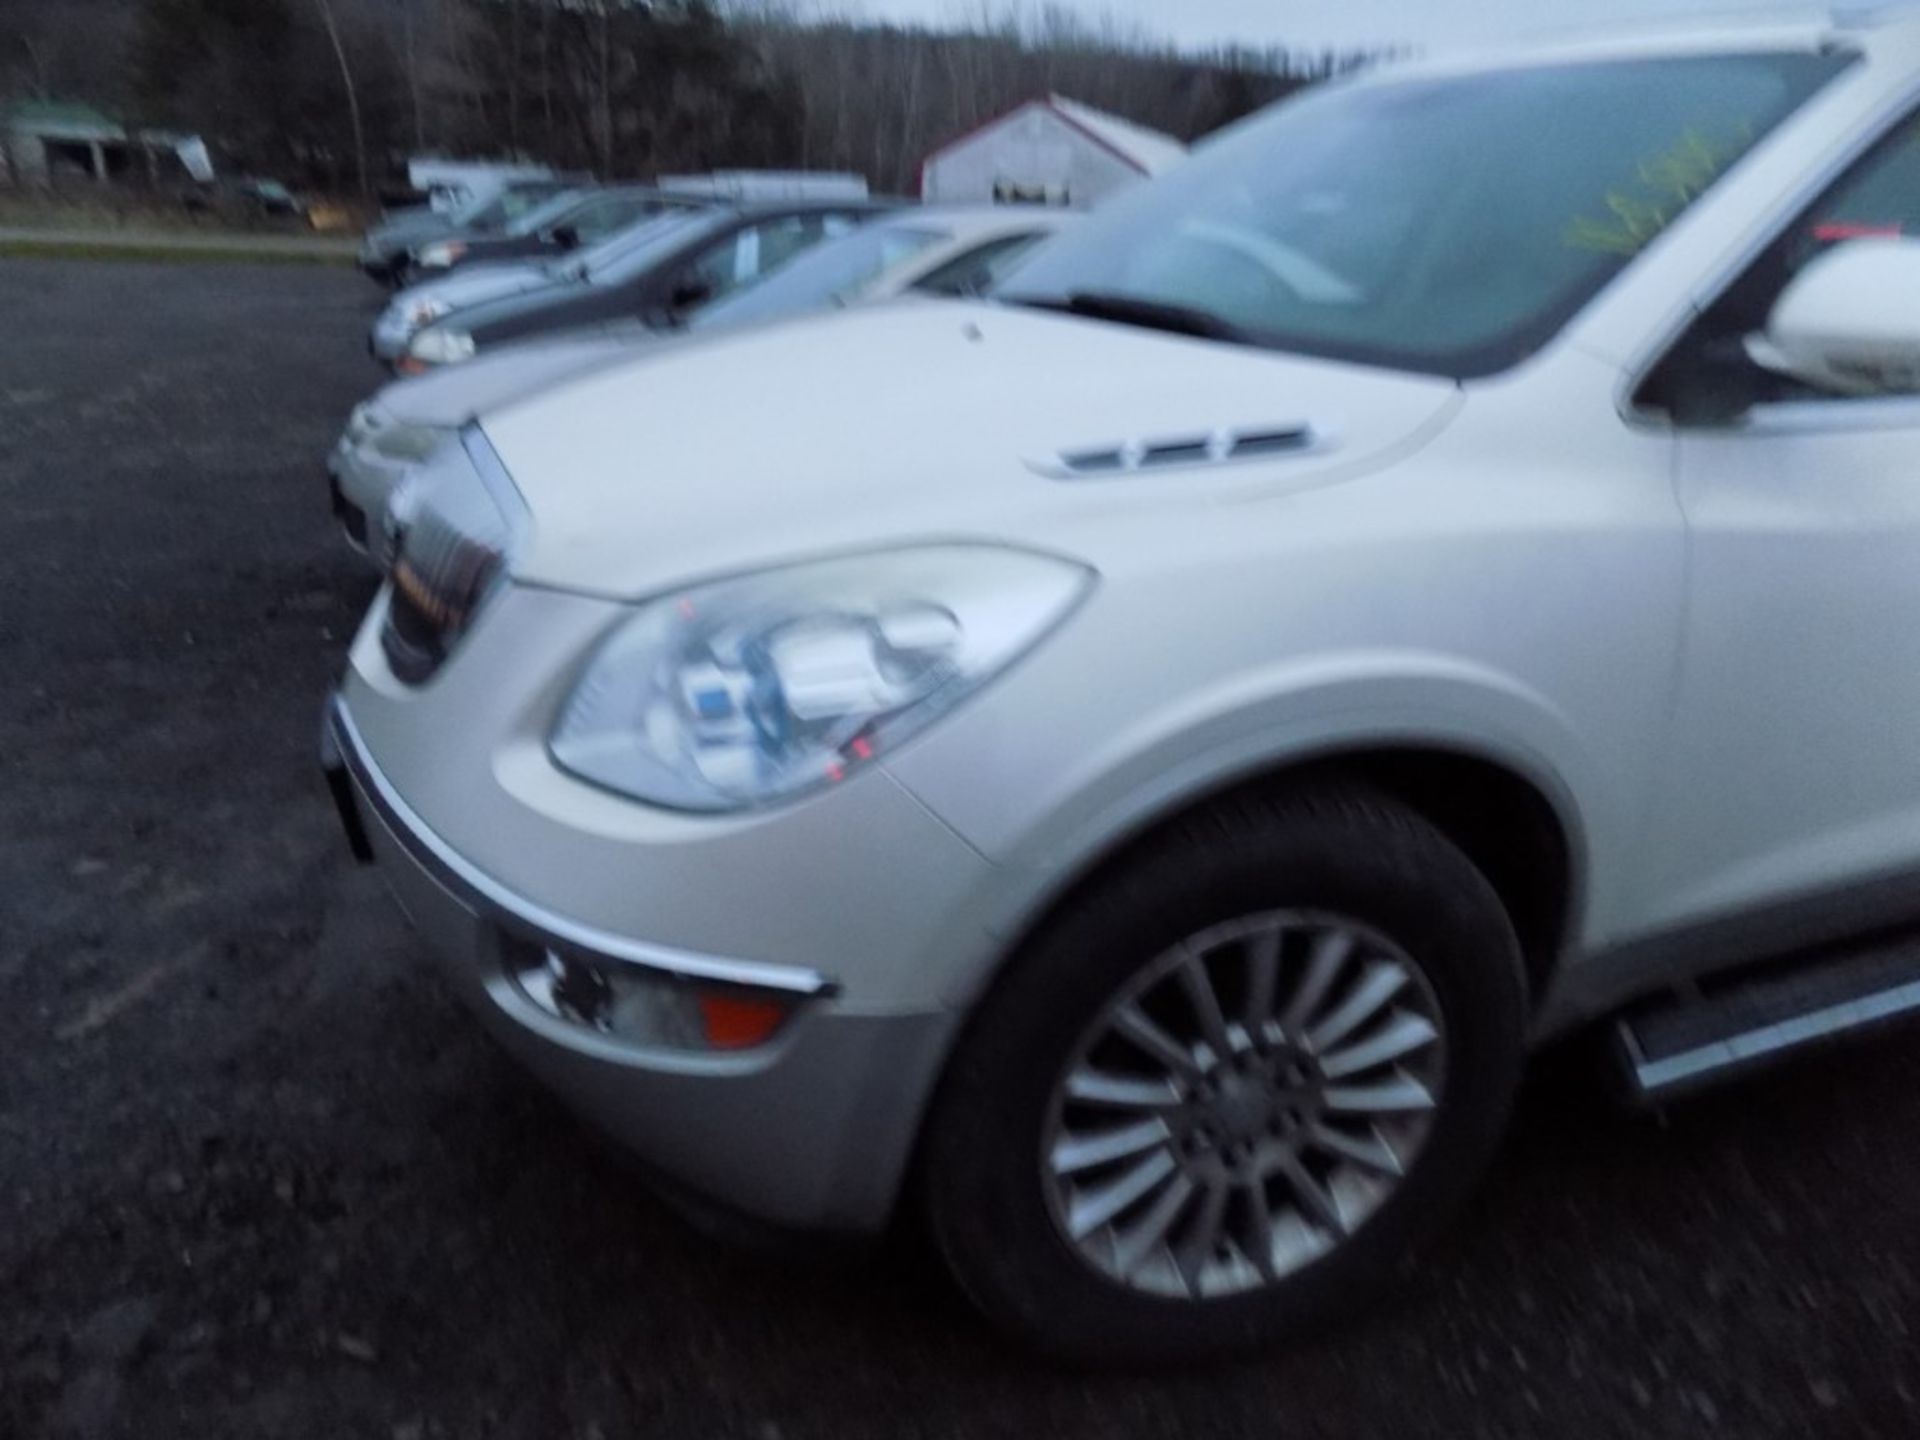 2011 Buick Enclave CXL-1, Leather, Sunroof, Front Wheel Drive, White, 160,845 Mi, PASSENGER FRONT - Image 2 of 13